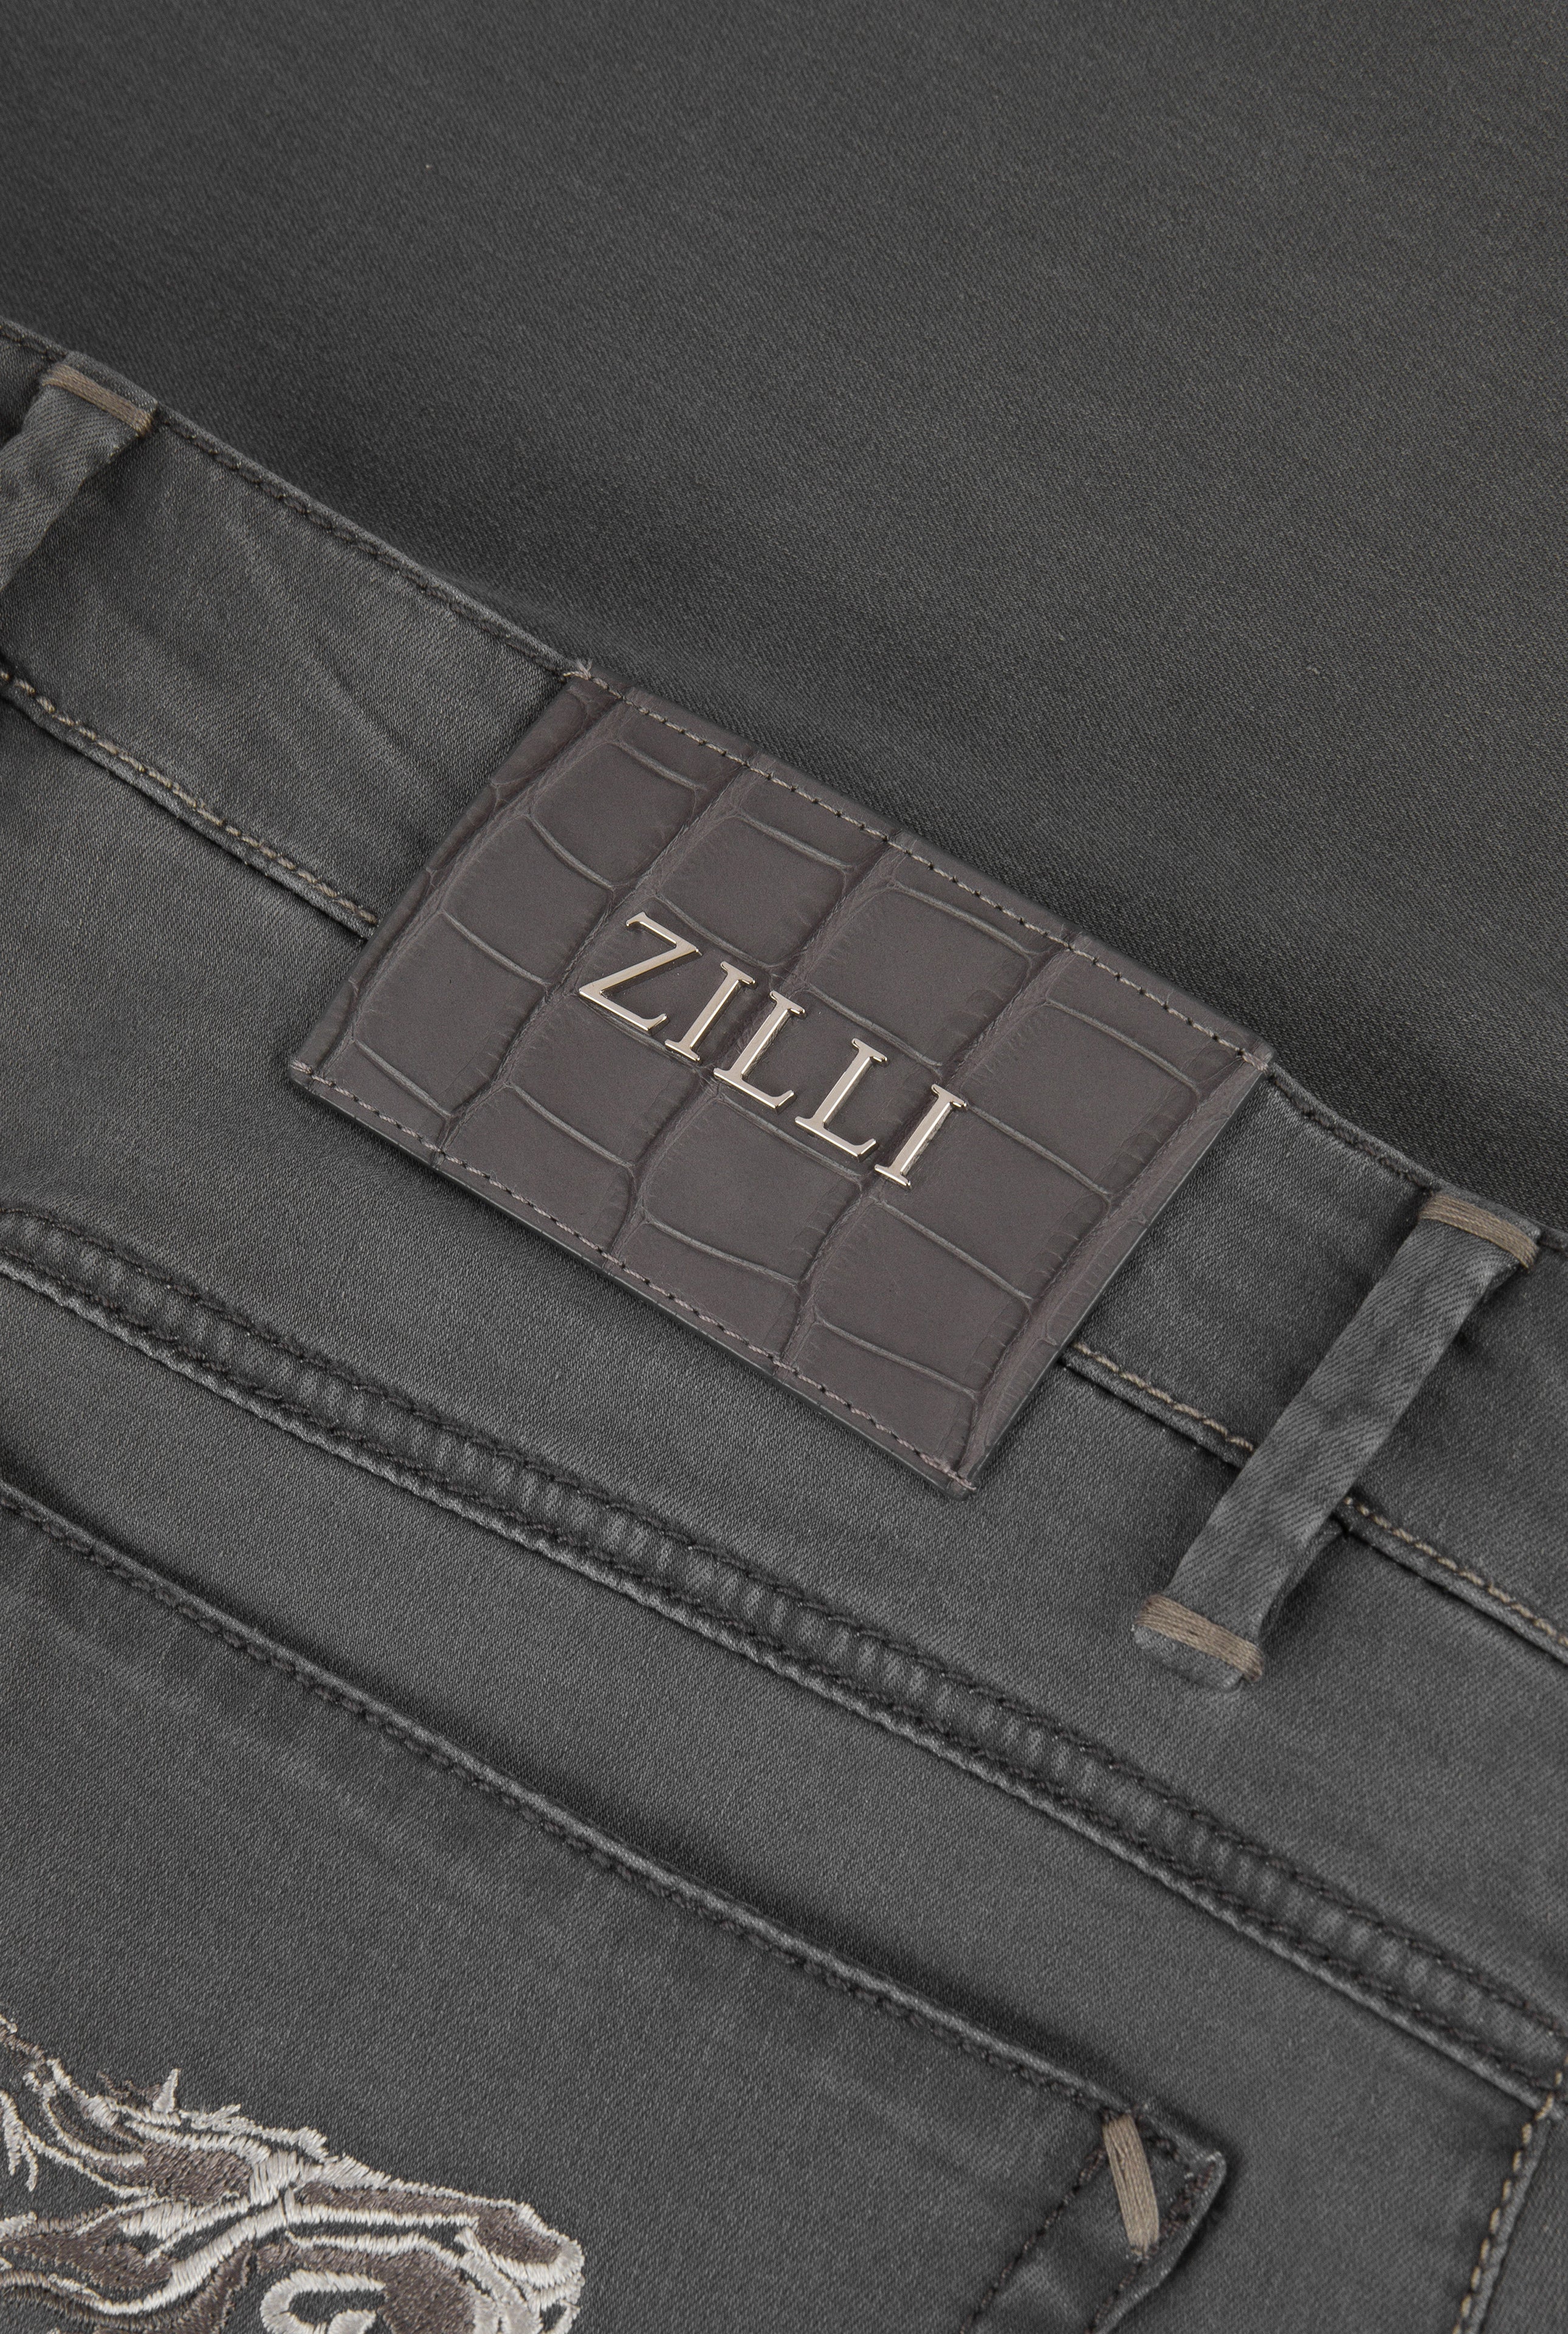 Zilli Regular Fit Jeans with Alligator Skin Patch